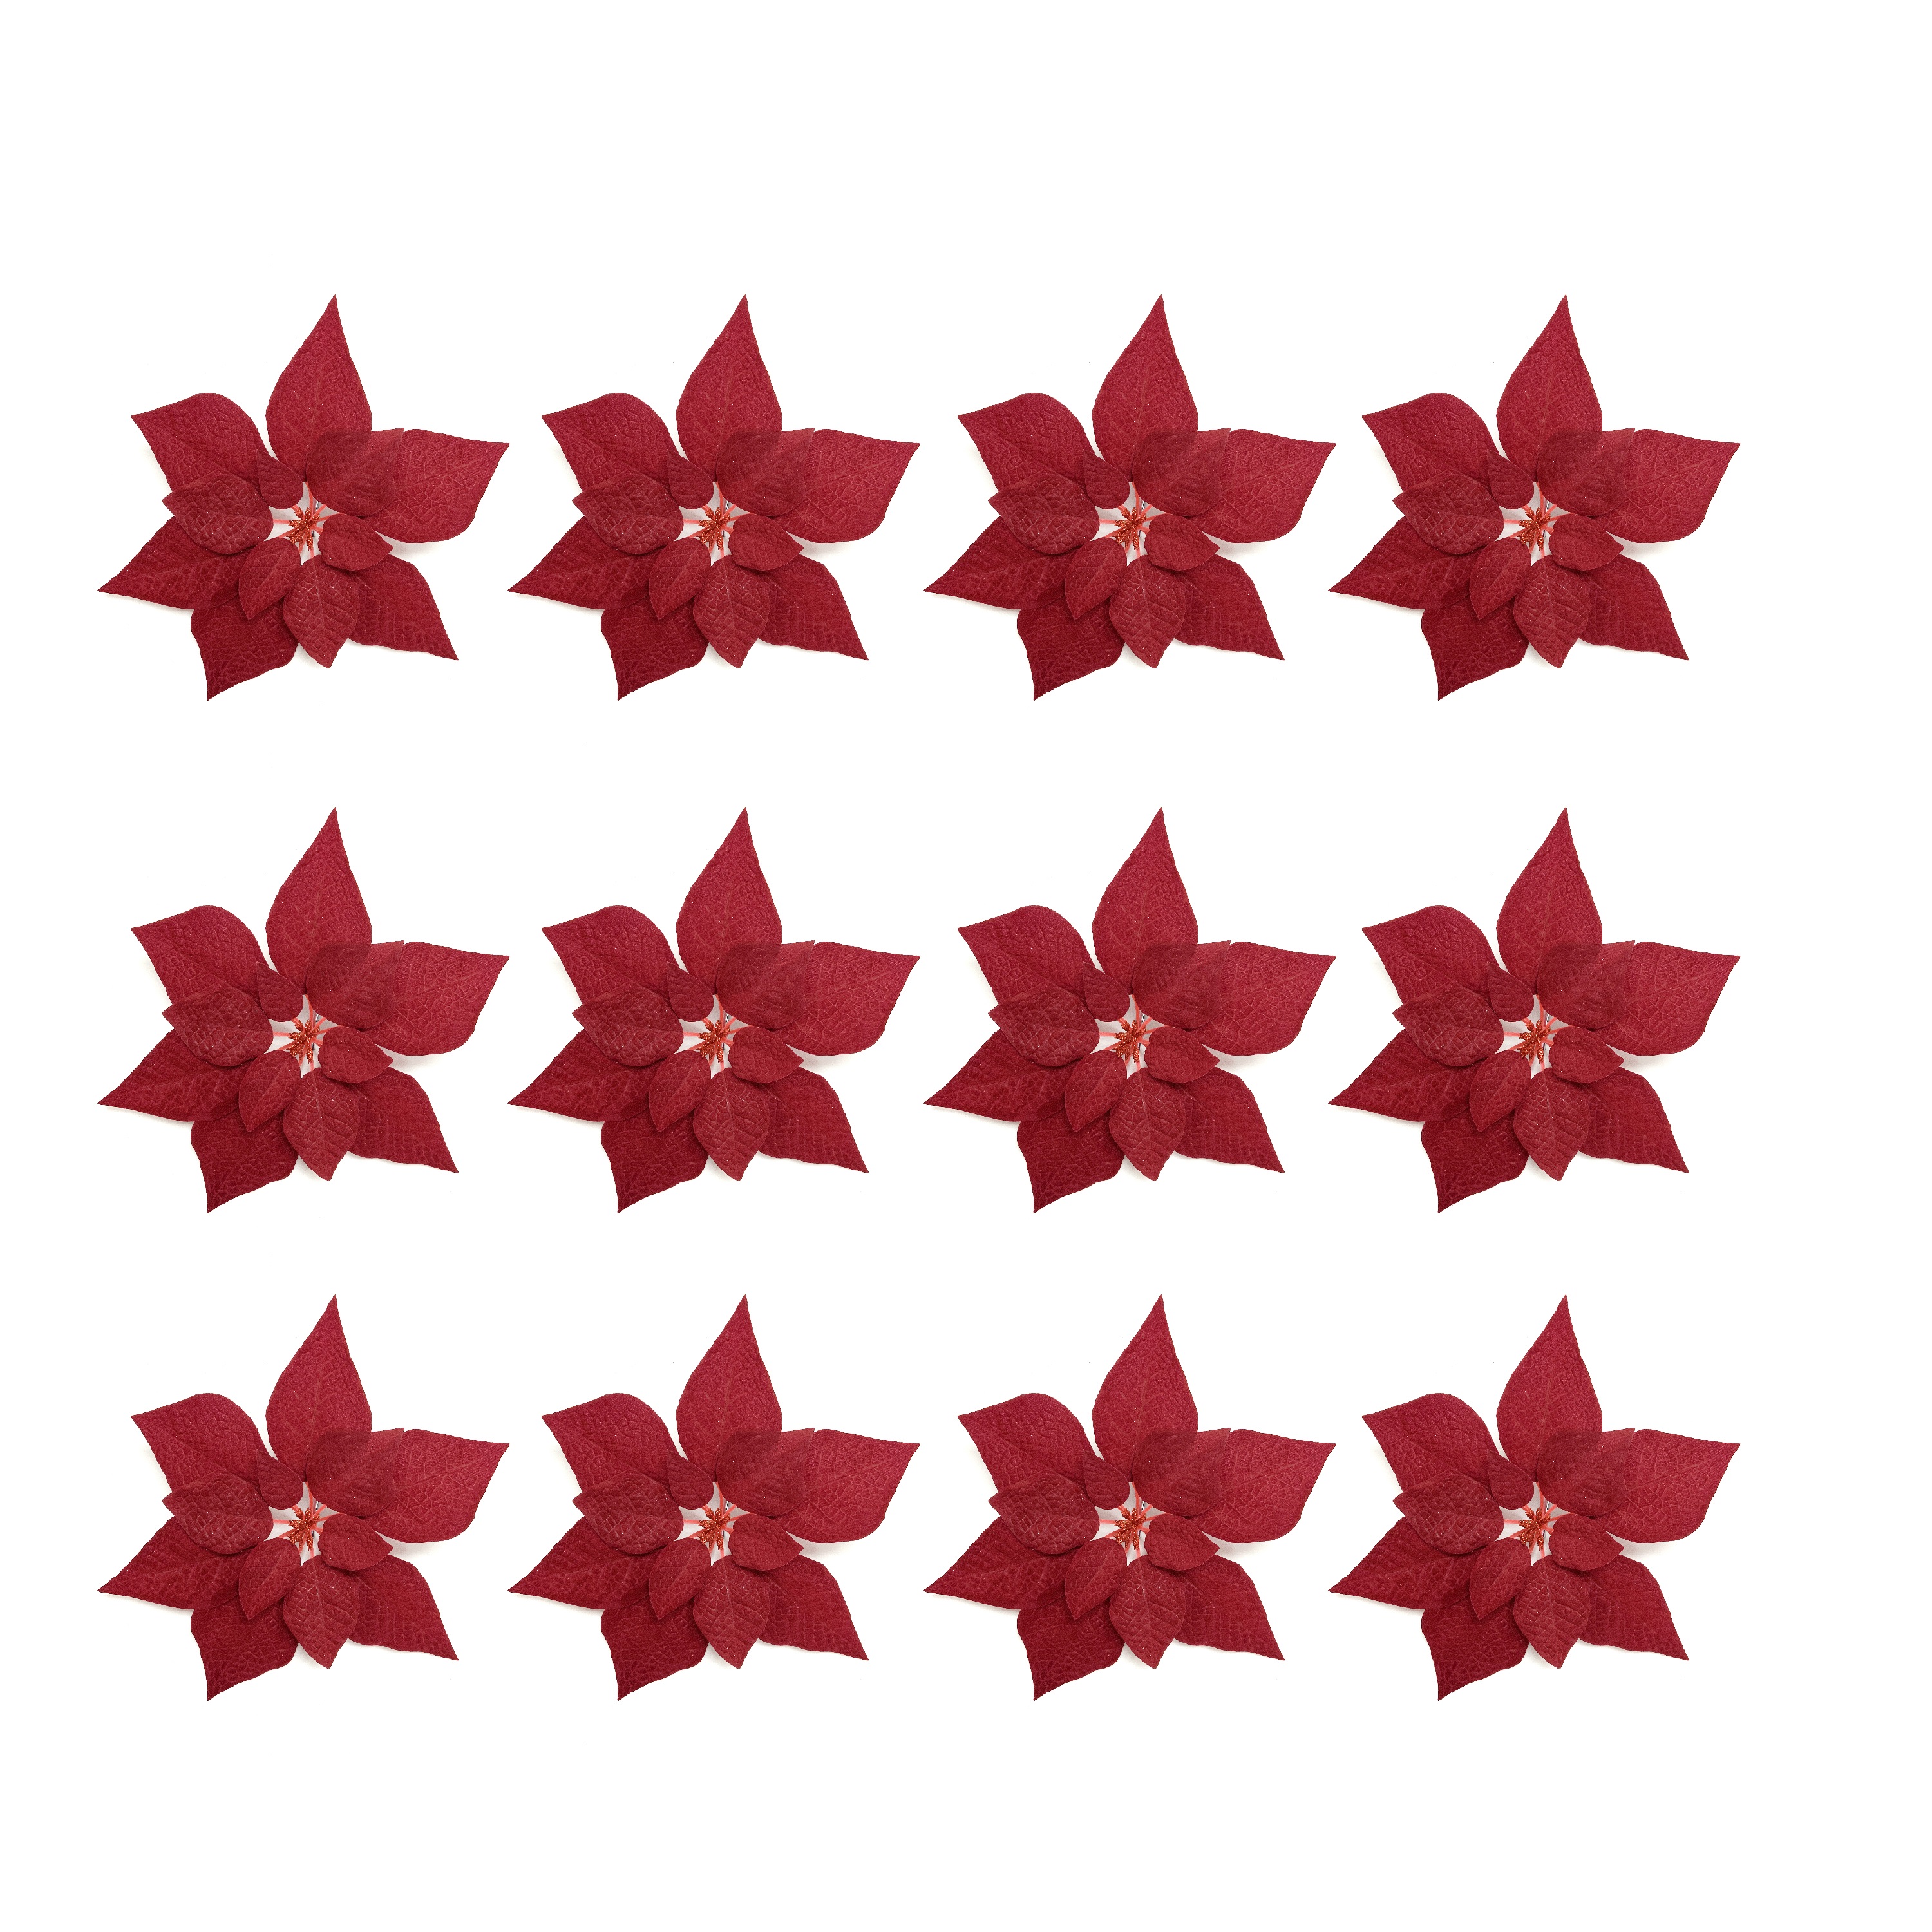 Holiday Time 11" Burgundy Red Velvet Poinsettia Clip Christmas Ornaments, 12 Count - image 1 of 5